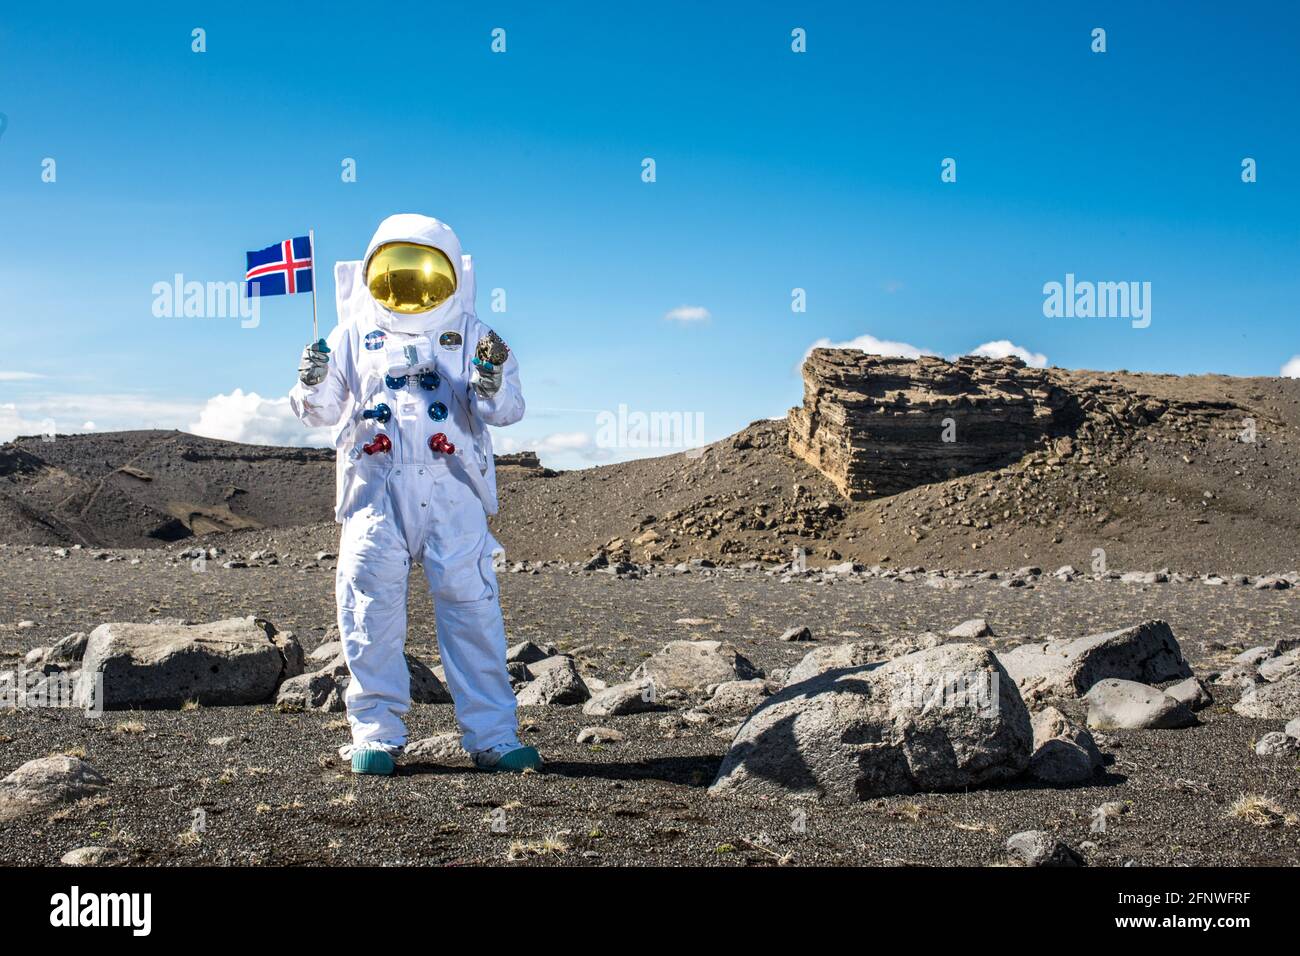 Astronaut in moonscape, Iceland Stock Photo